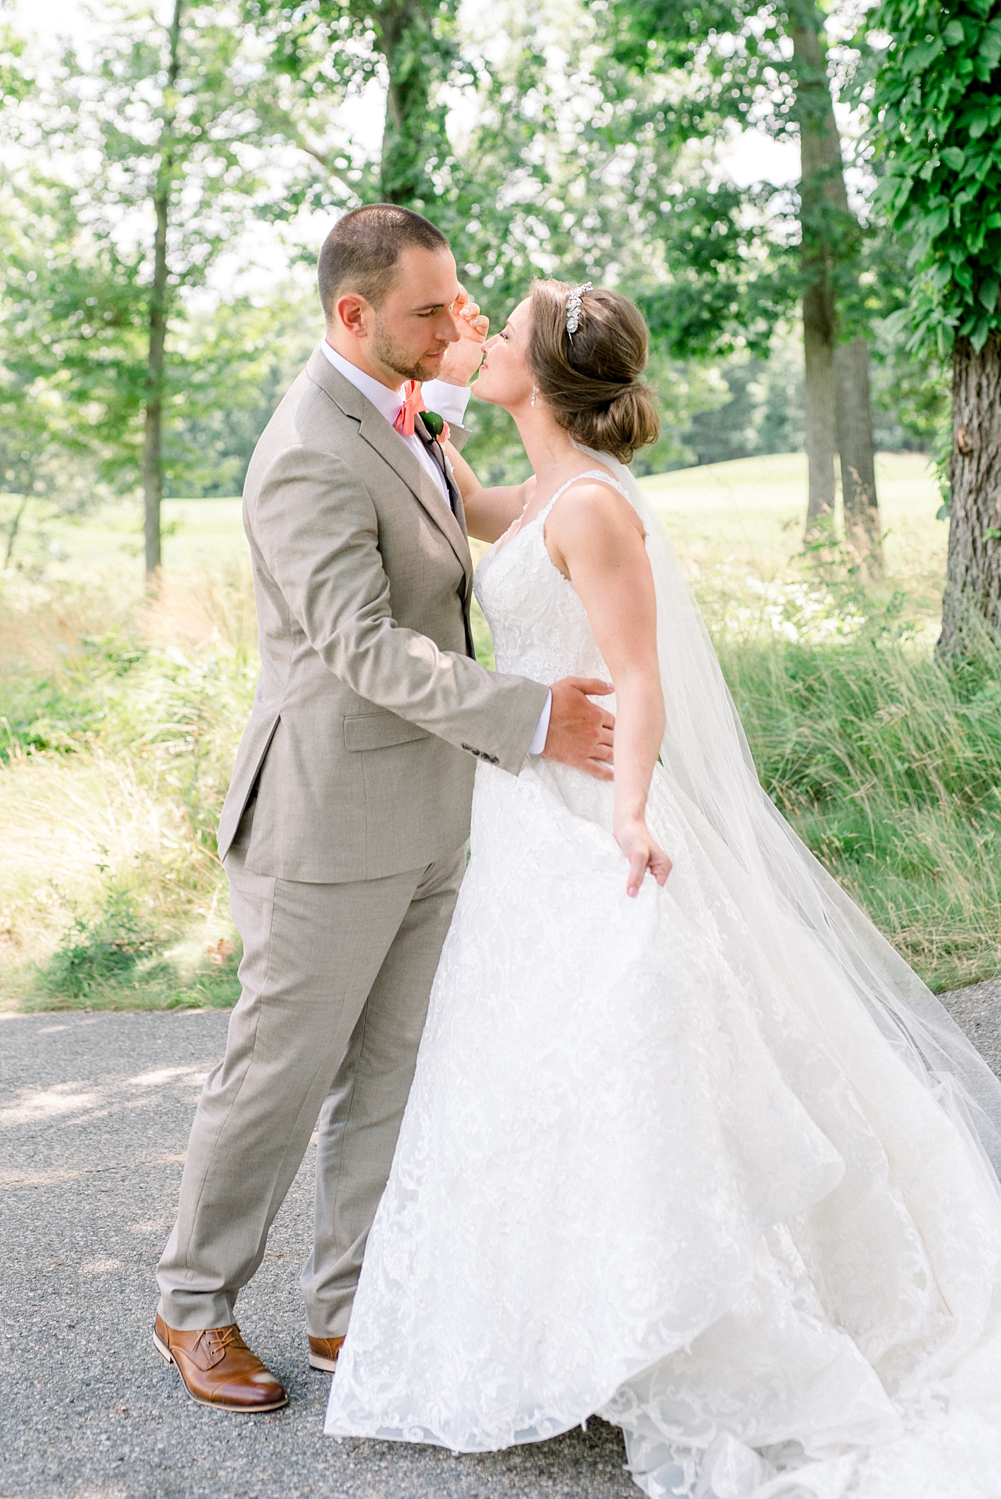 Romantic Garden Themed, Peach and Coral Summertime Wedding by Erika Christine Photography. 